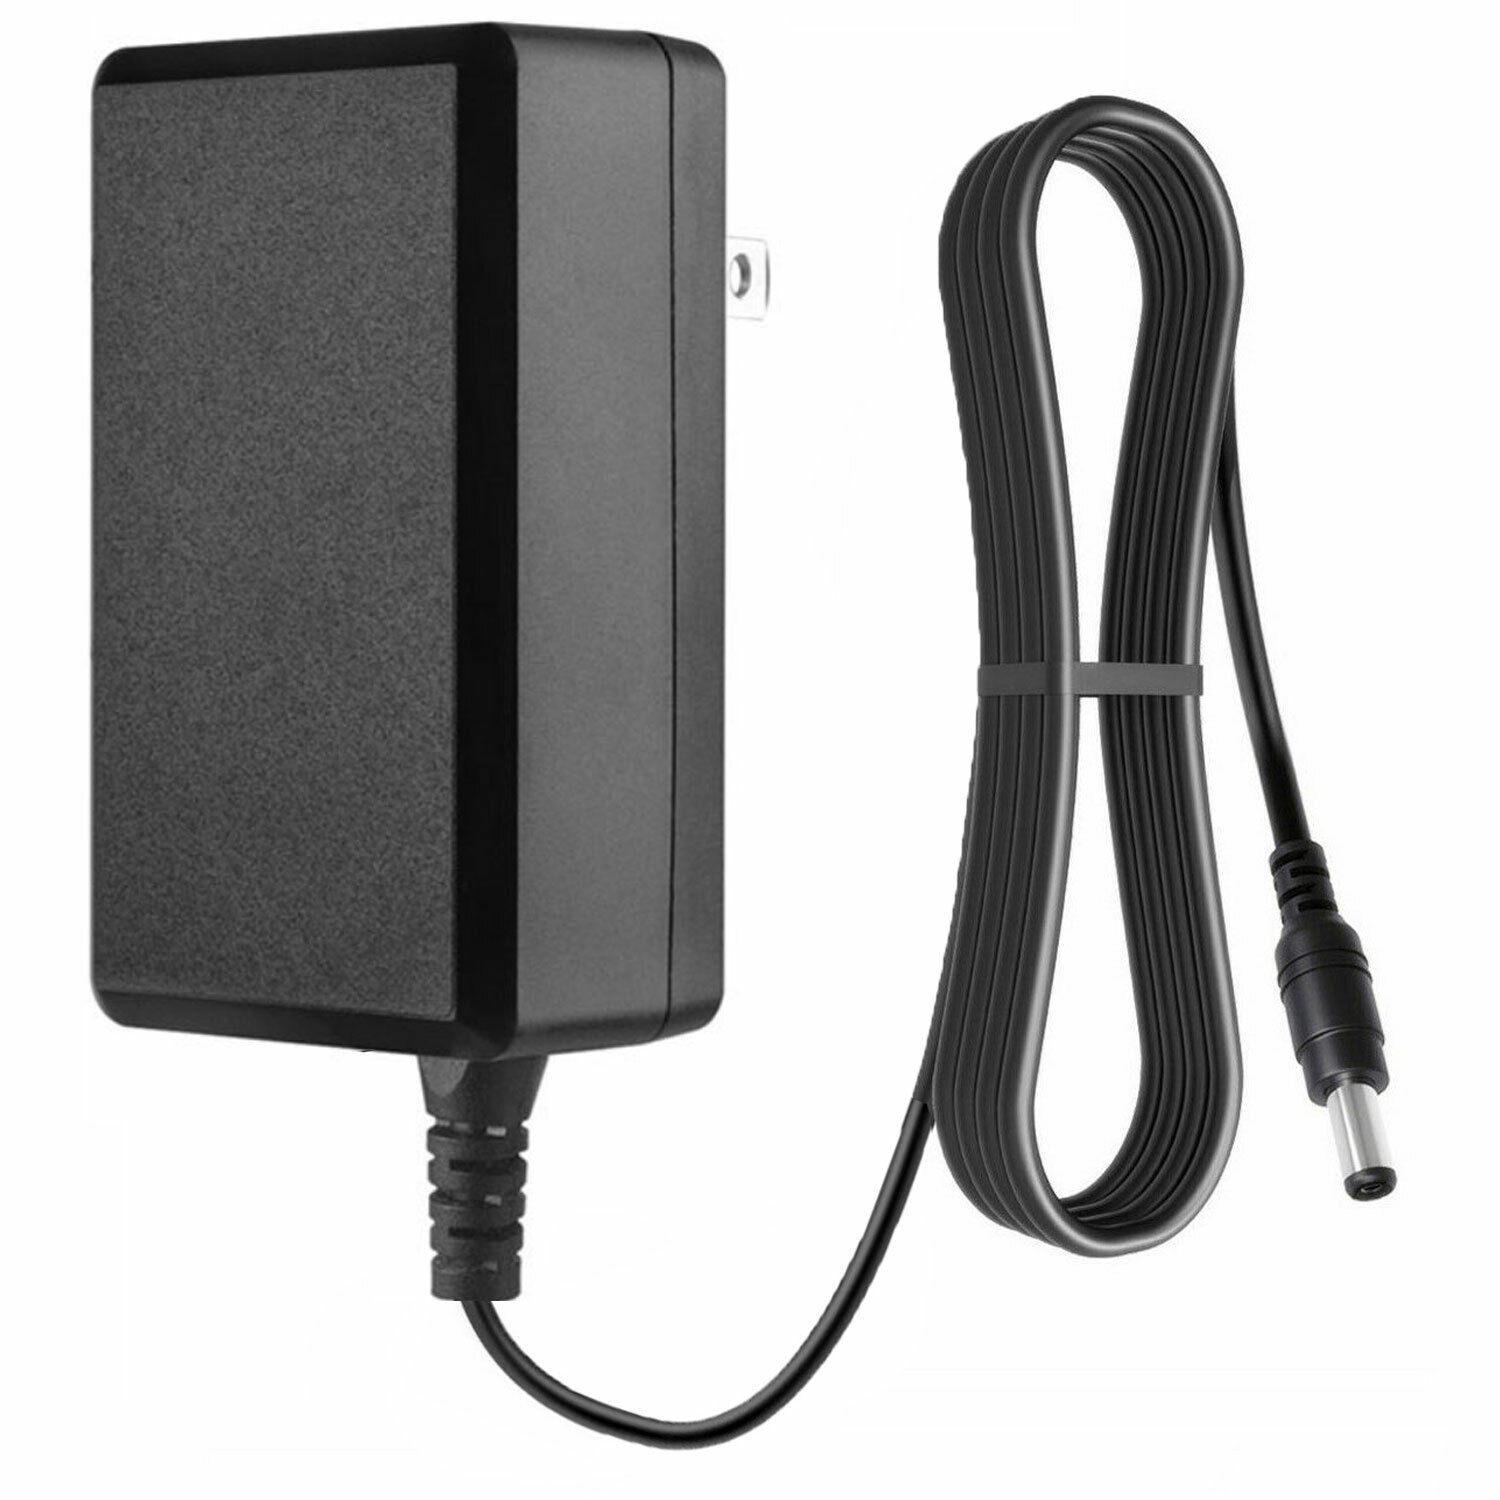 AC Power Adapter Compatible with Panasonic PV-GS34PKG PV-GS36 PV-GS39 PV-GS59 PV-GS69 Co